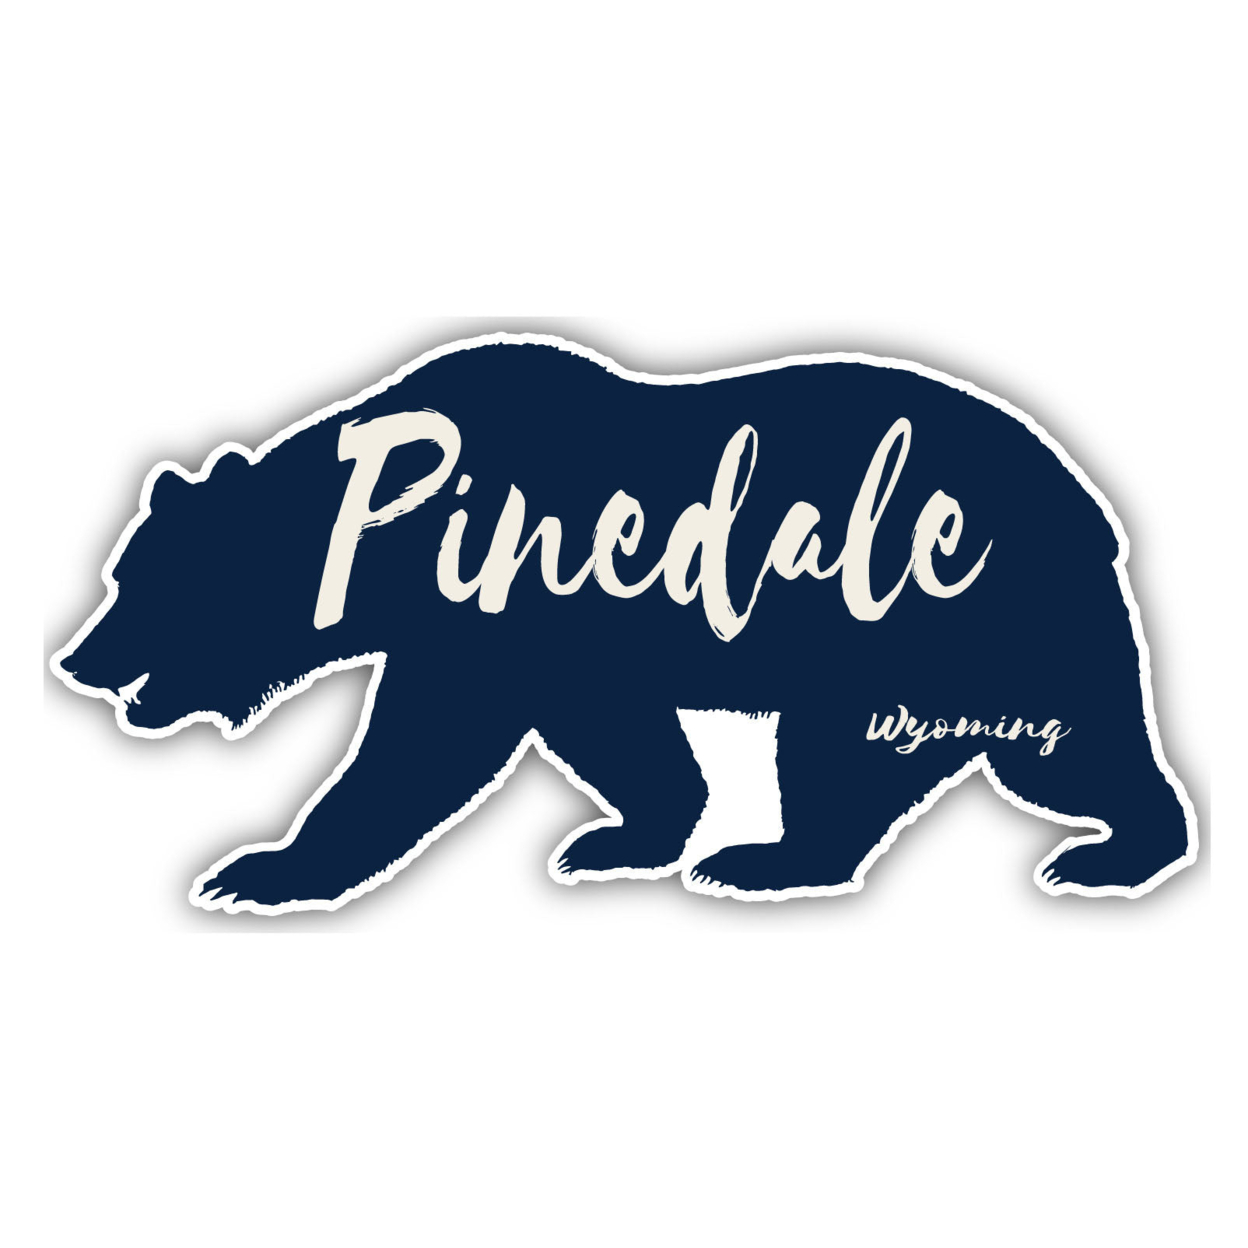 Pinedale Wyoming Souvenir Decorative Stickers (Choose Theme And Size) - Single Unit, 2-Inch, Bear